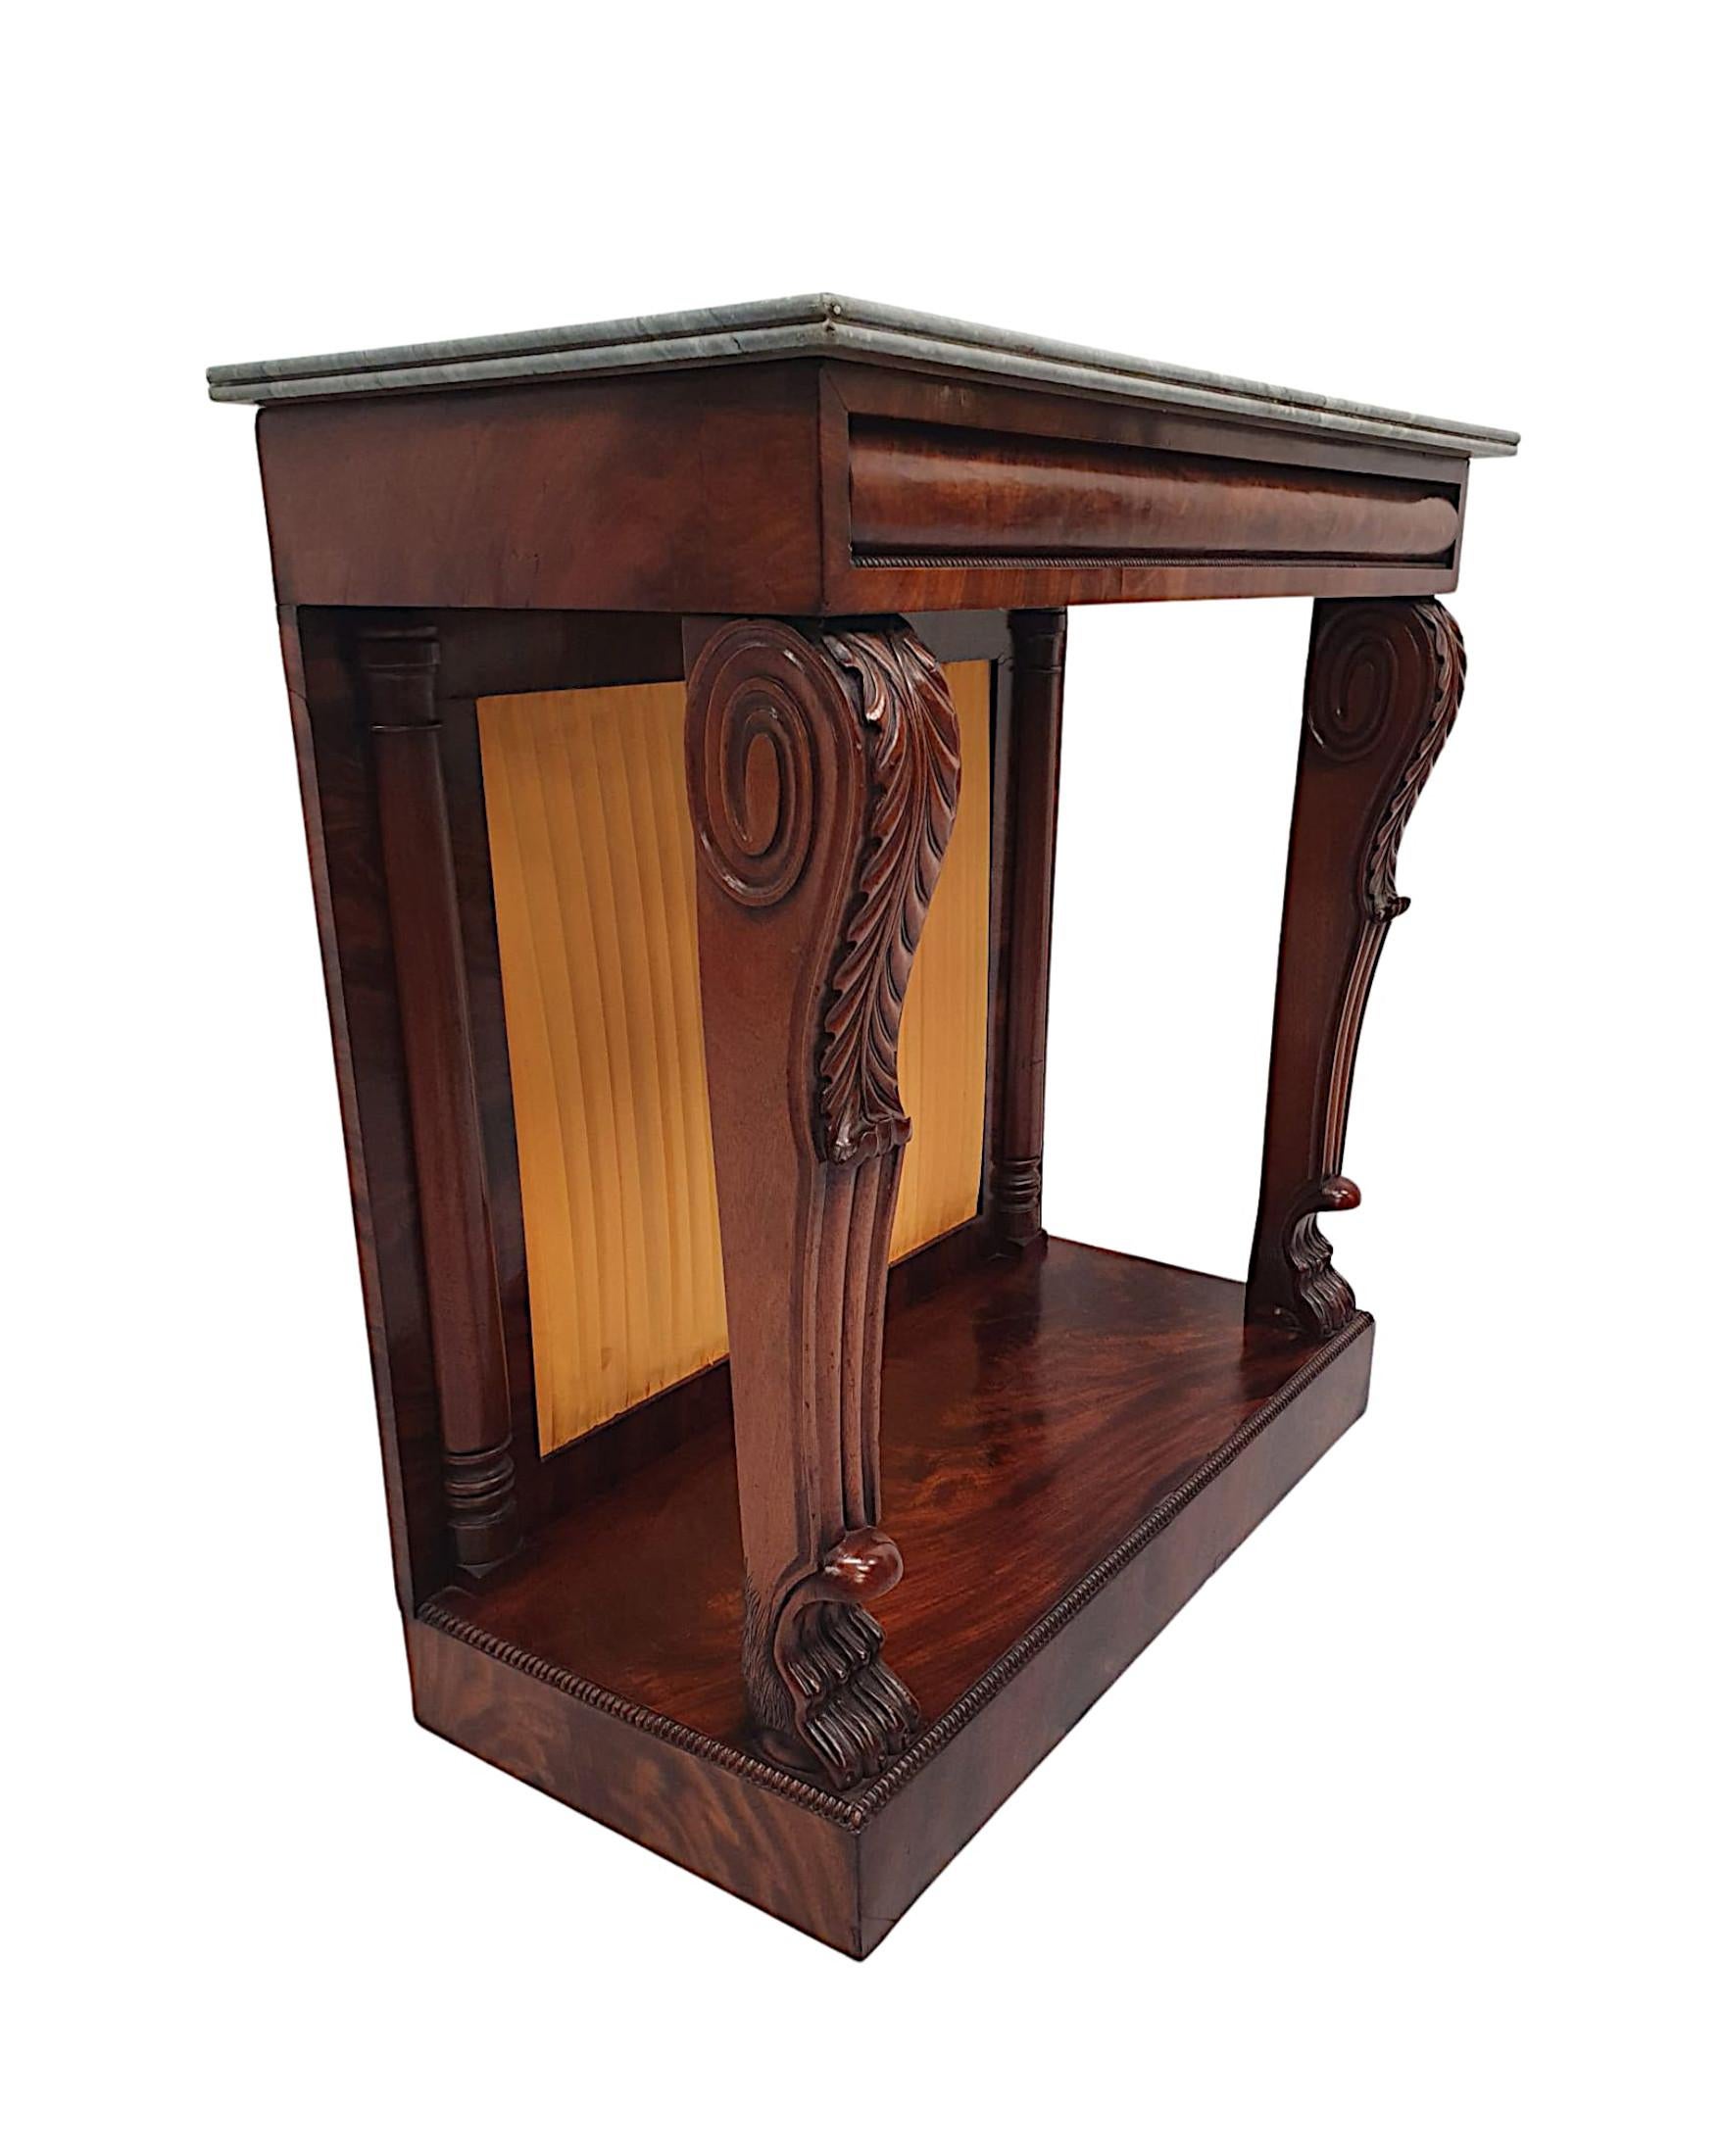 A rare 19th century mahogany marble top console table, of neat proportions, fabulous quality and finely hand carved with rich patination and grain. The moulded emperador marble top is raised over an elegant, moulded convex frieze with beading motif